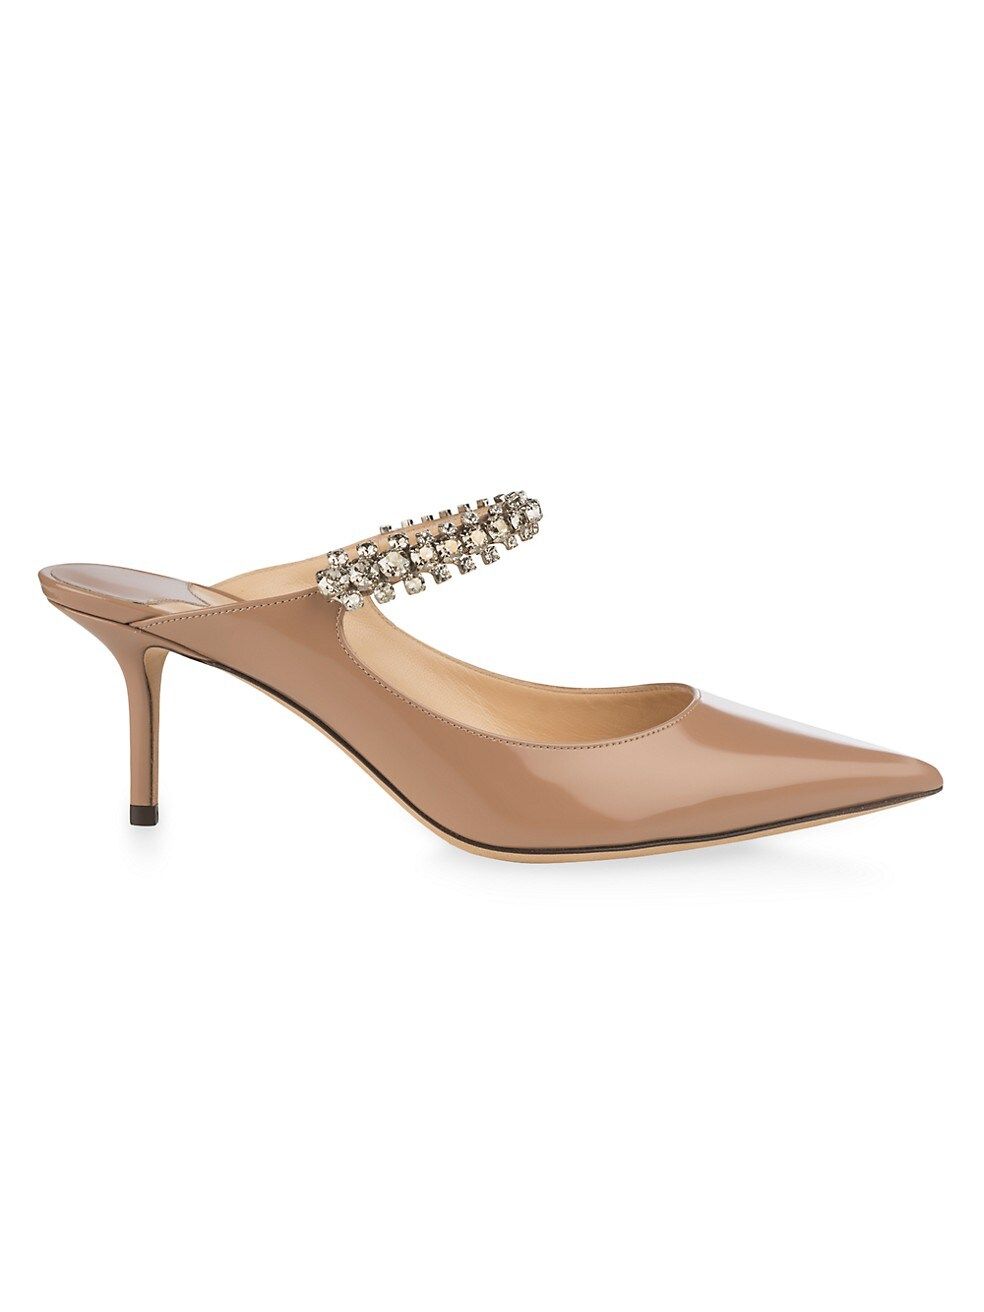 Jimmy Choo Bing 65 Embellished Patent Leather Mules | Saks Fifth Avenue